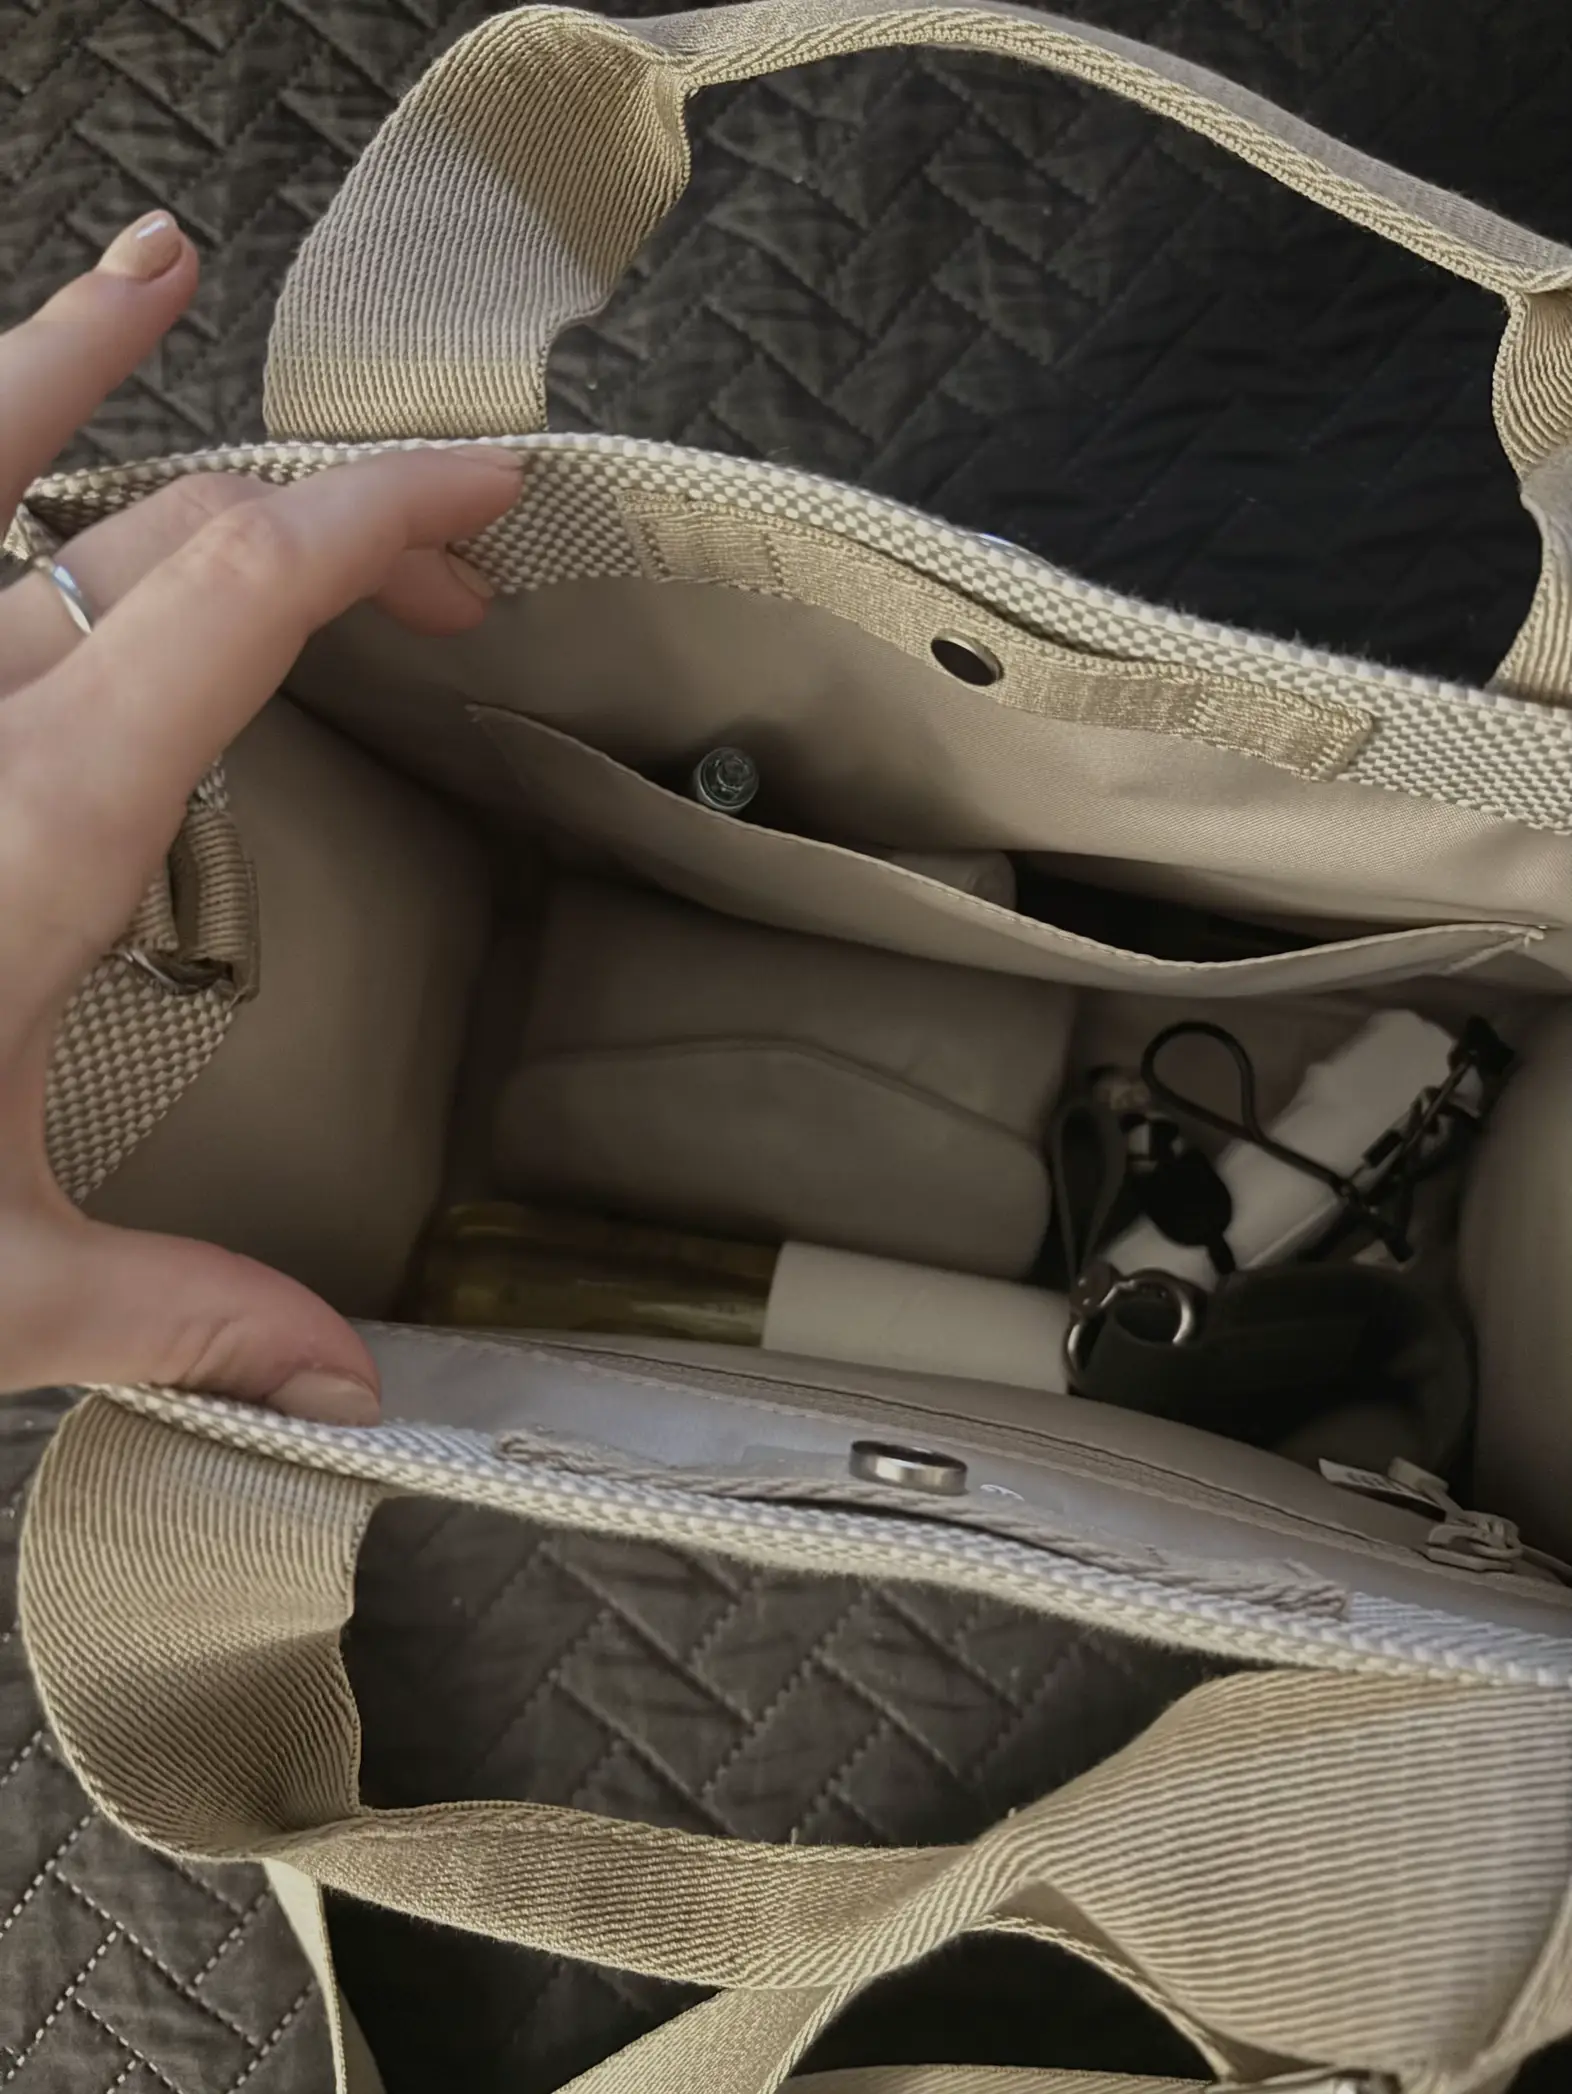 This $15 Bag At Target Is A Dupe For the Lululemon Everywhere Belt Bag